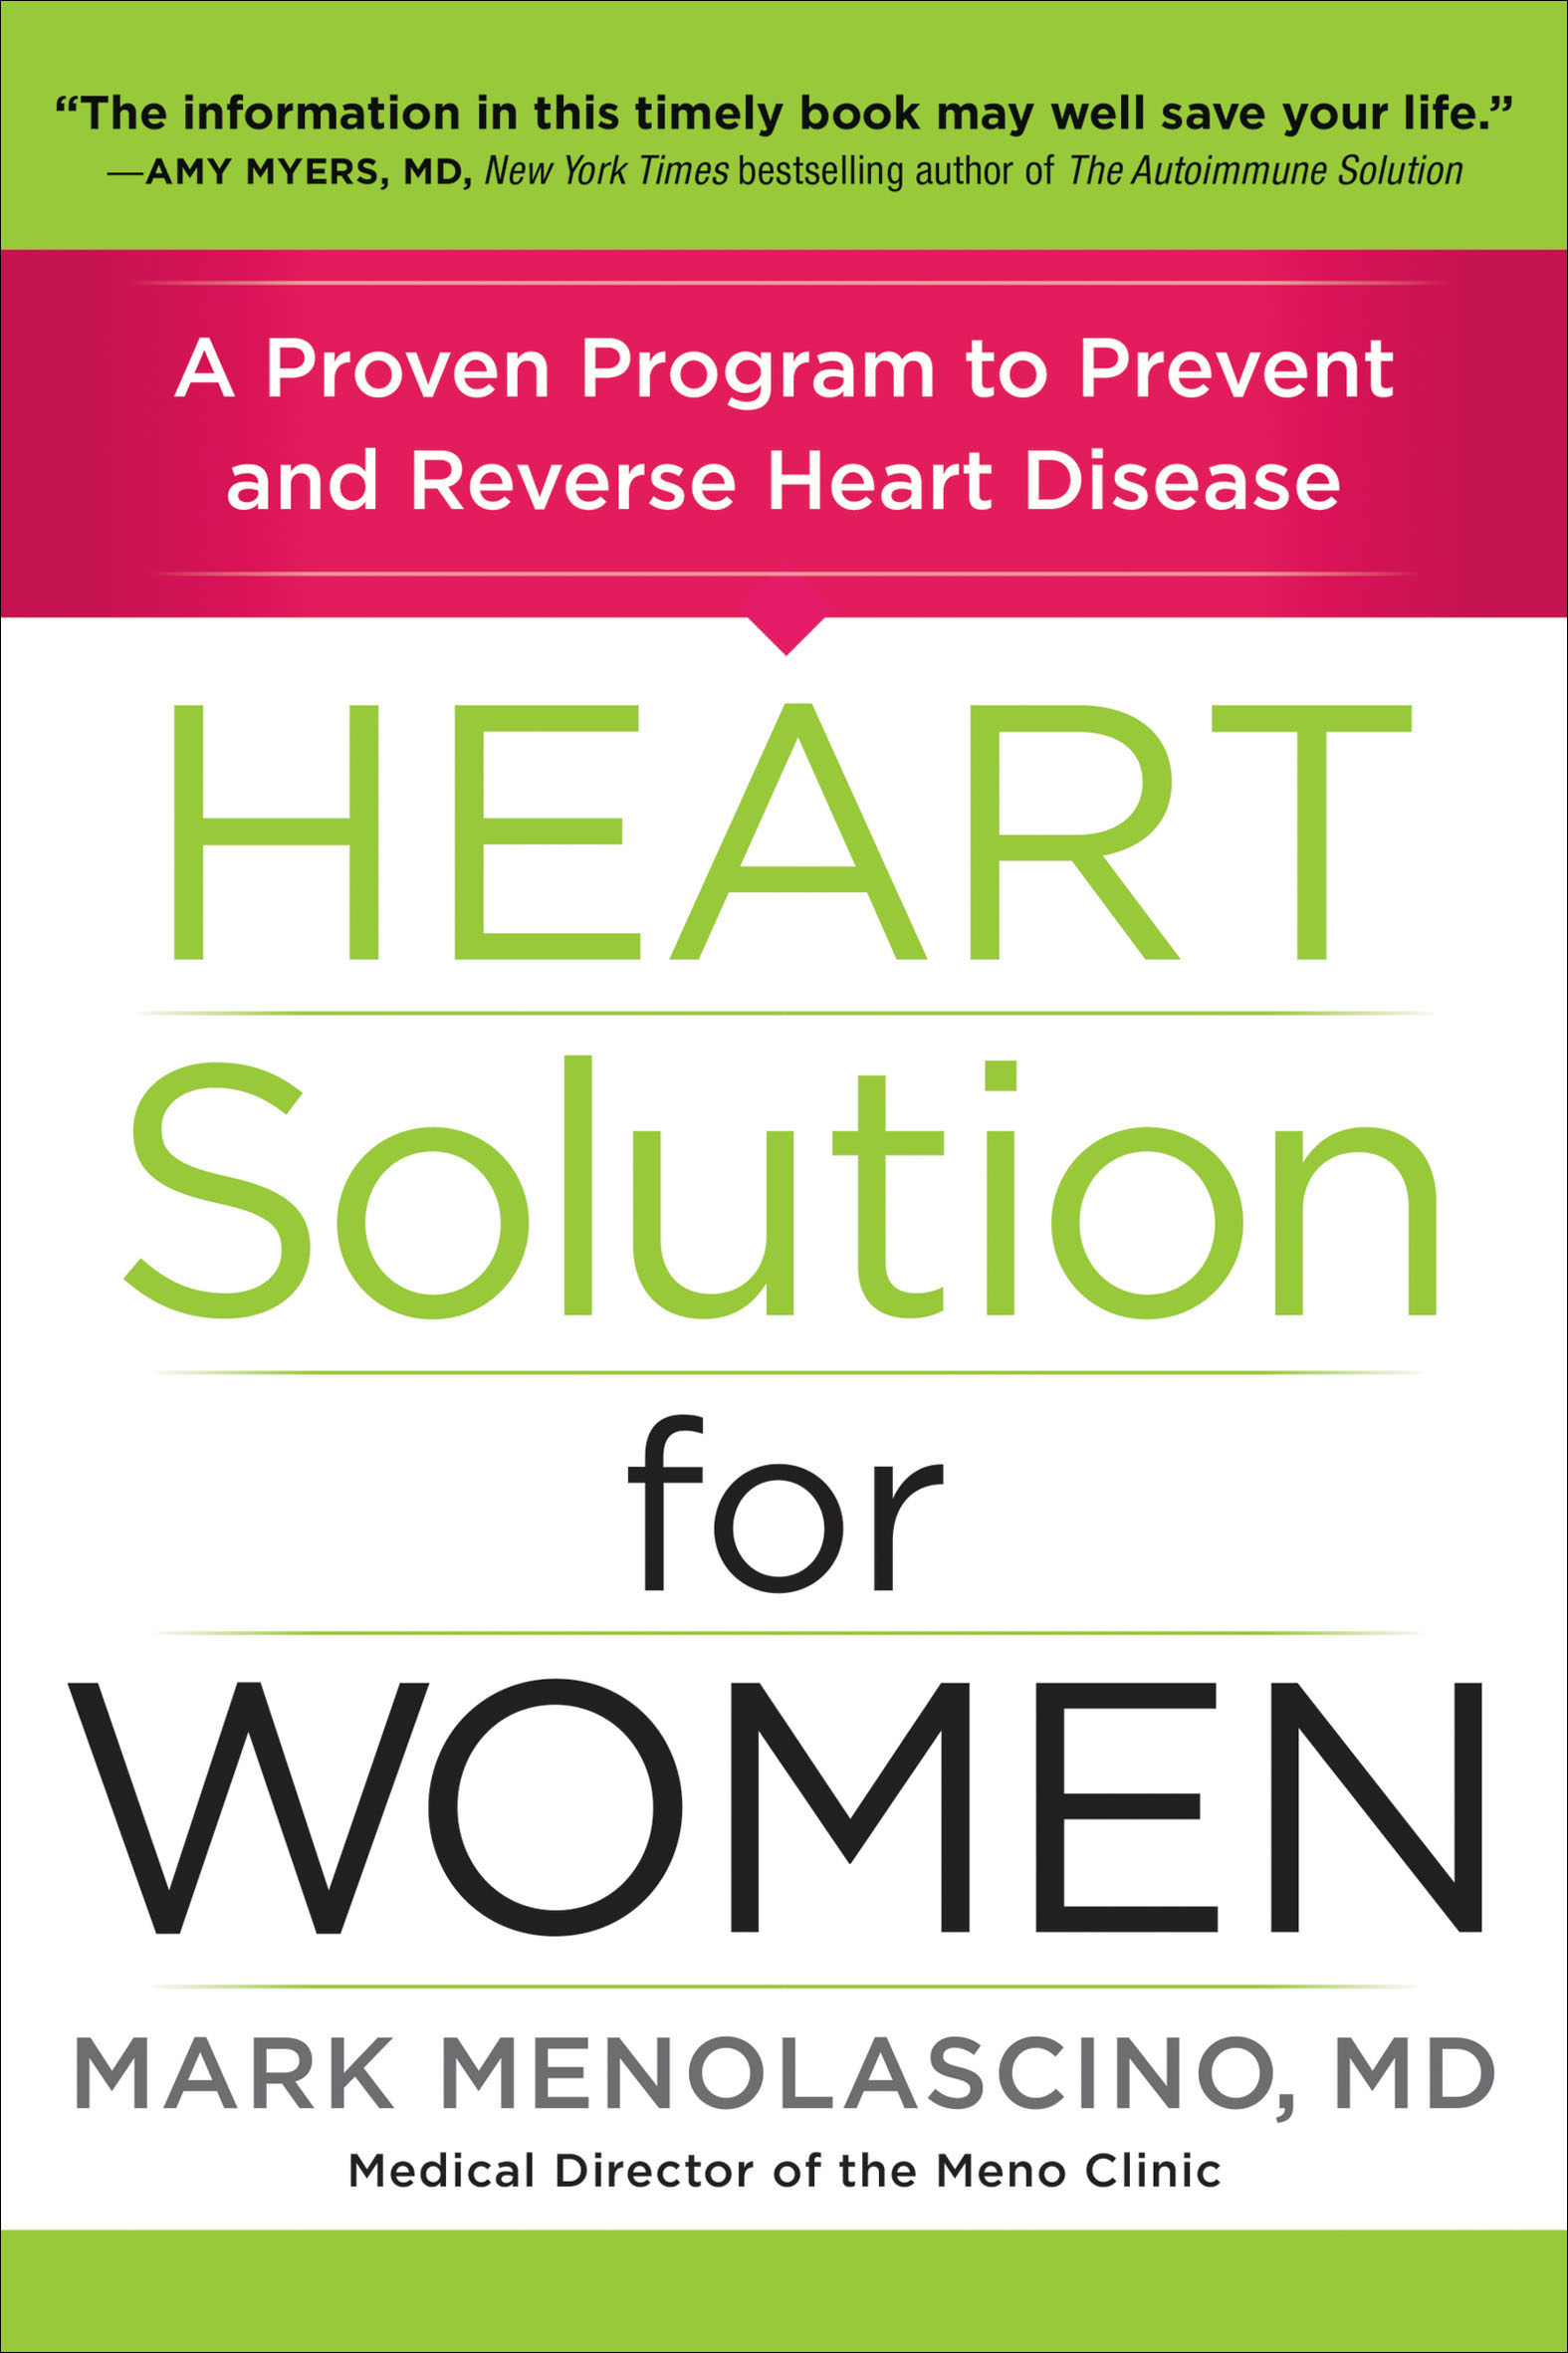 Heart solution for women a proven program to prevent and reverse heart disease cover image